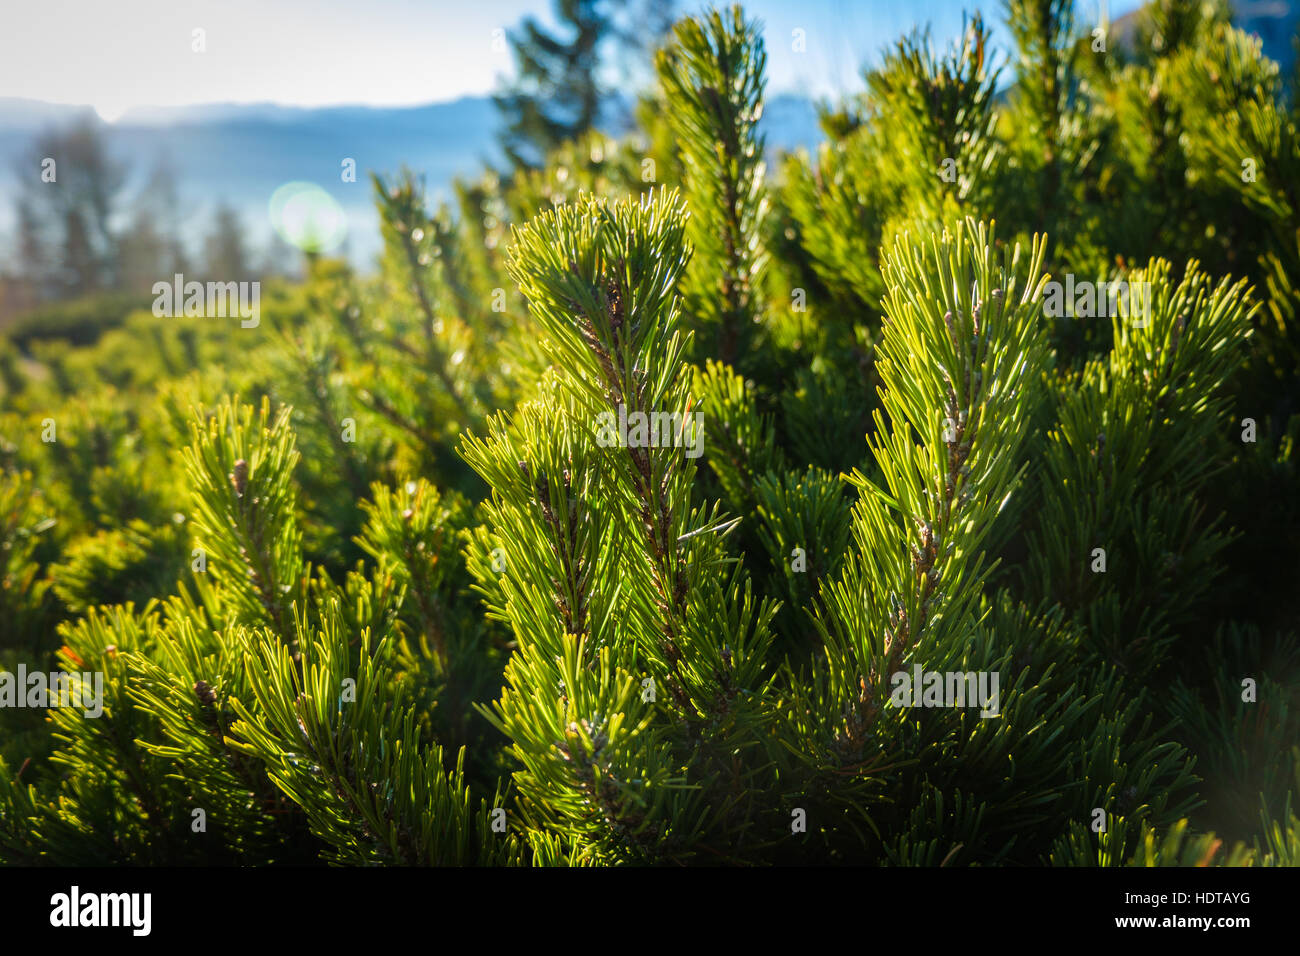 Branches of a dwarf pine (common high alitutde vegetation in the Alps). Stock Photo